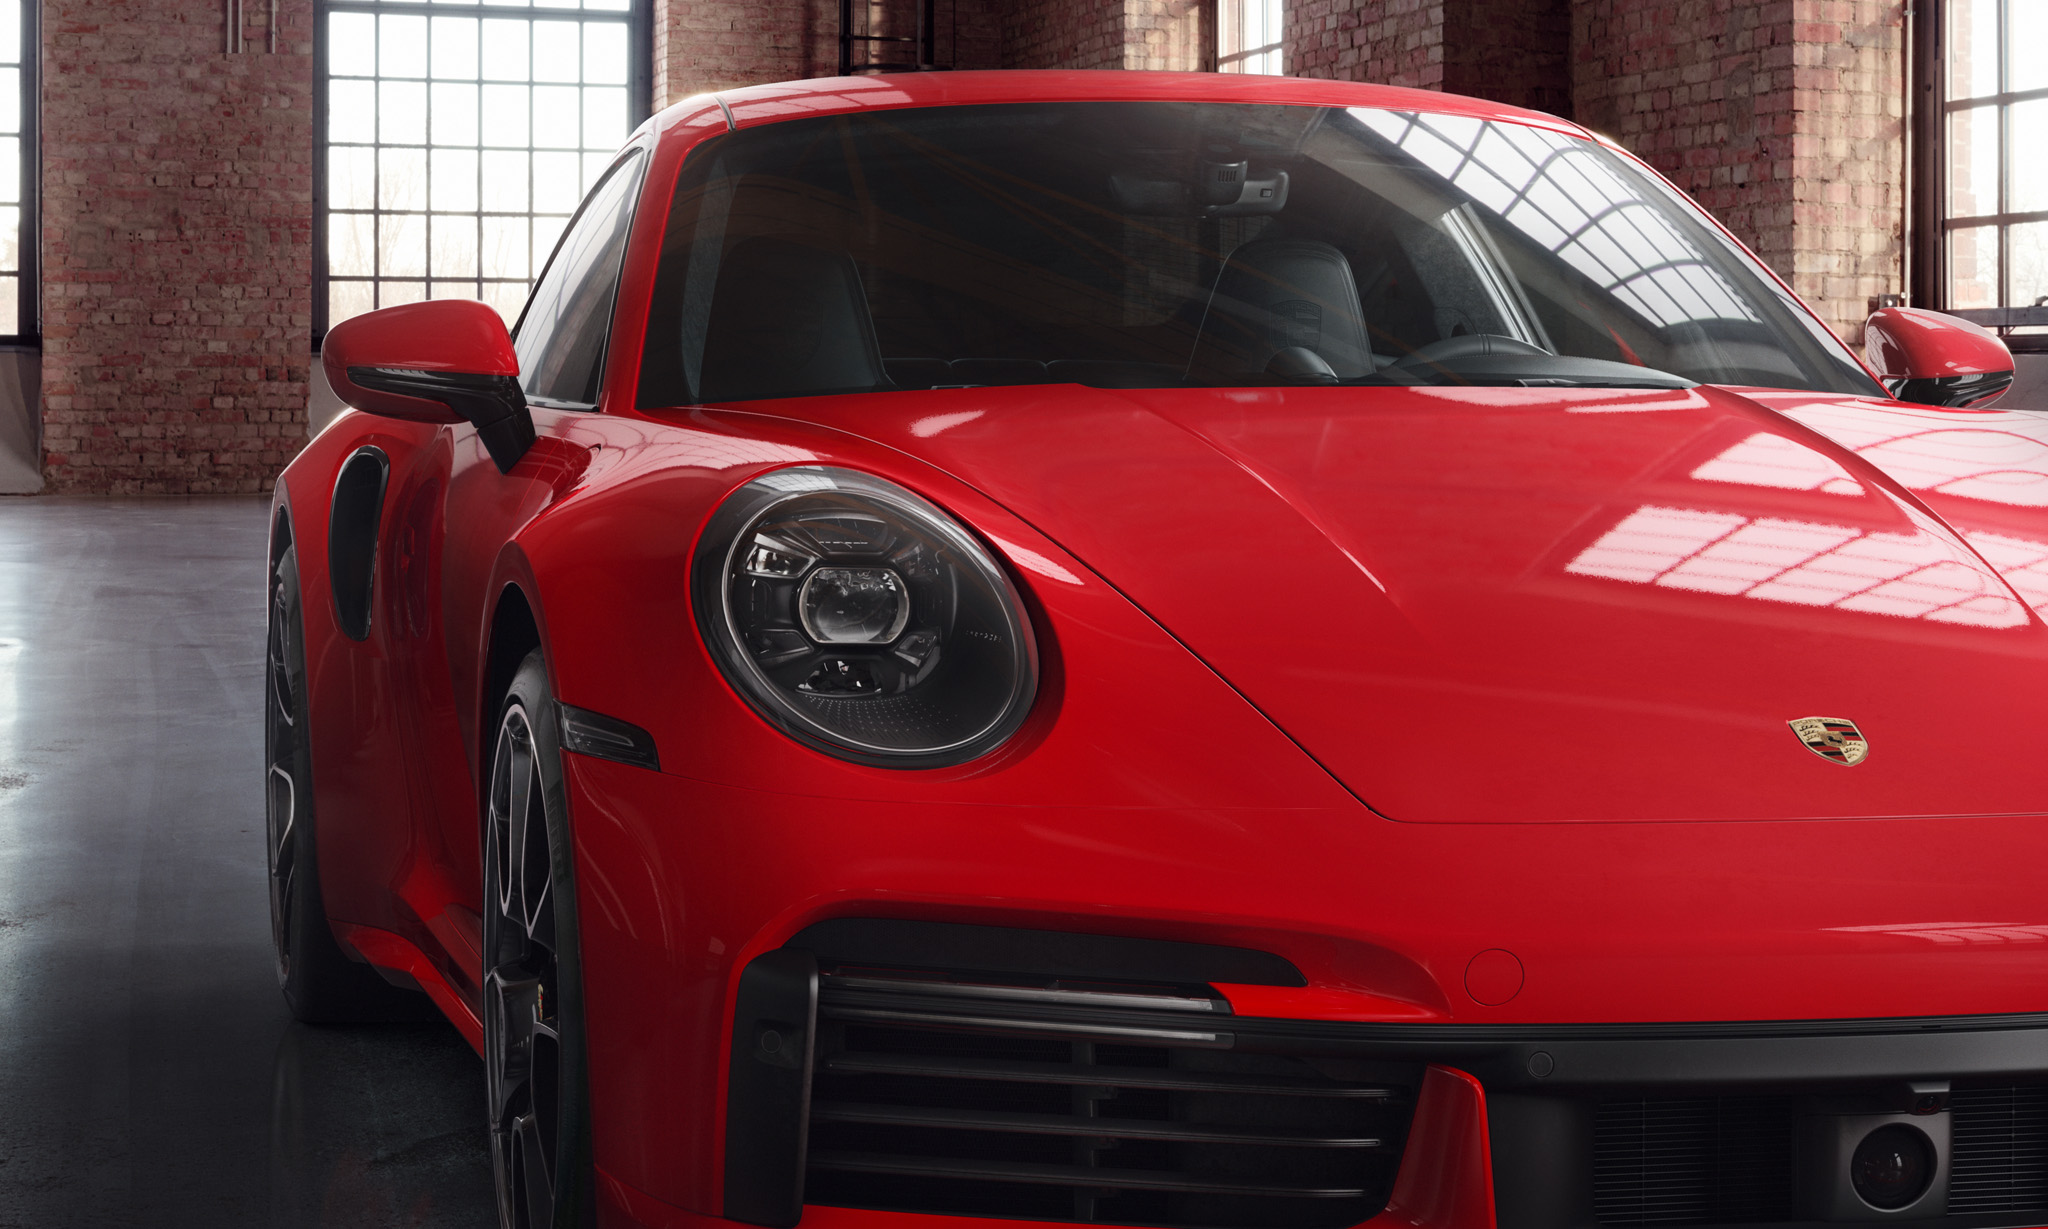 Porsche Exclusive Showcases An Indian Red 2021 911 Turbo S ...